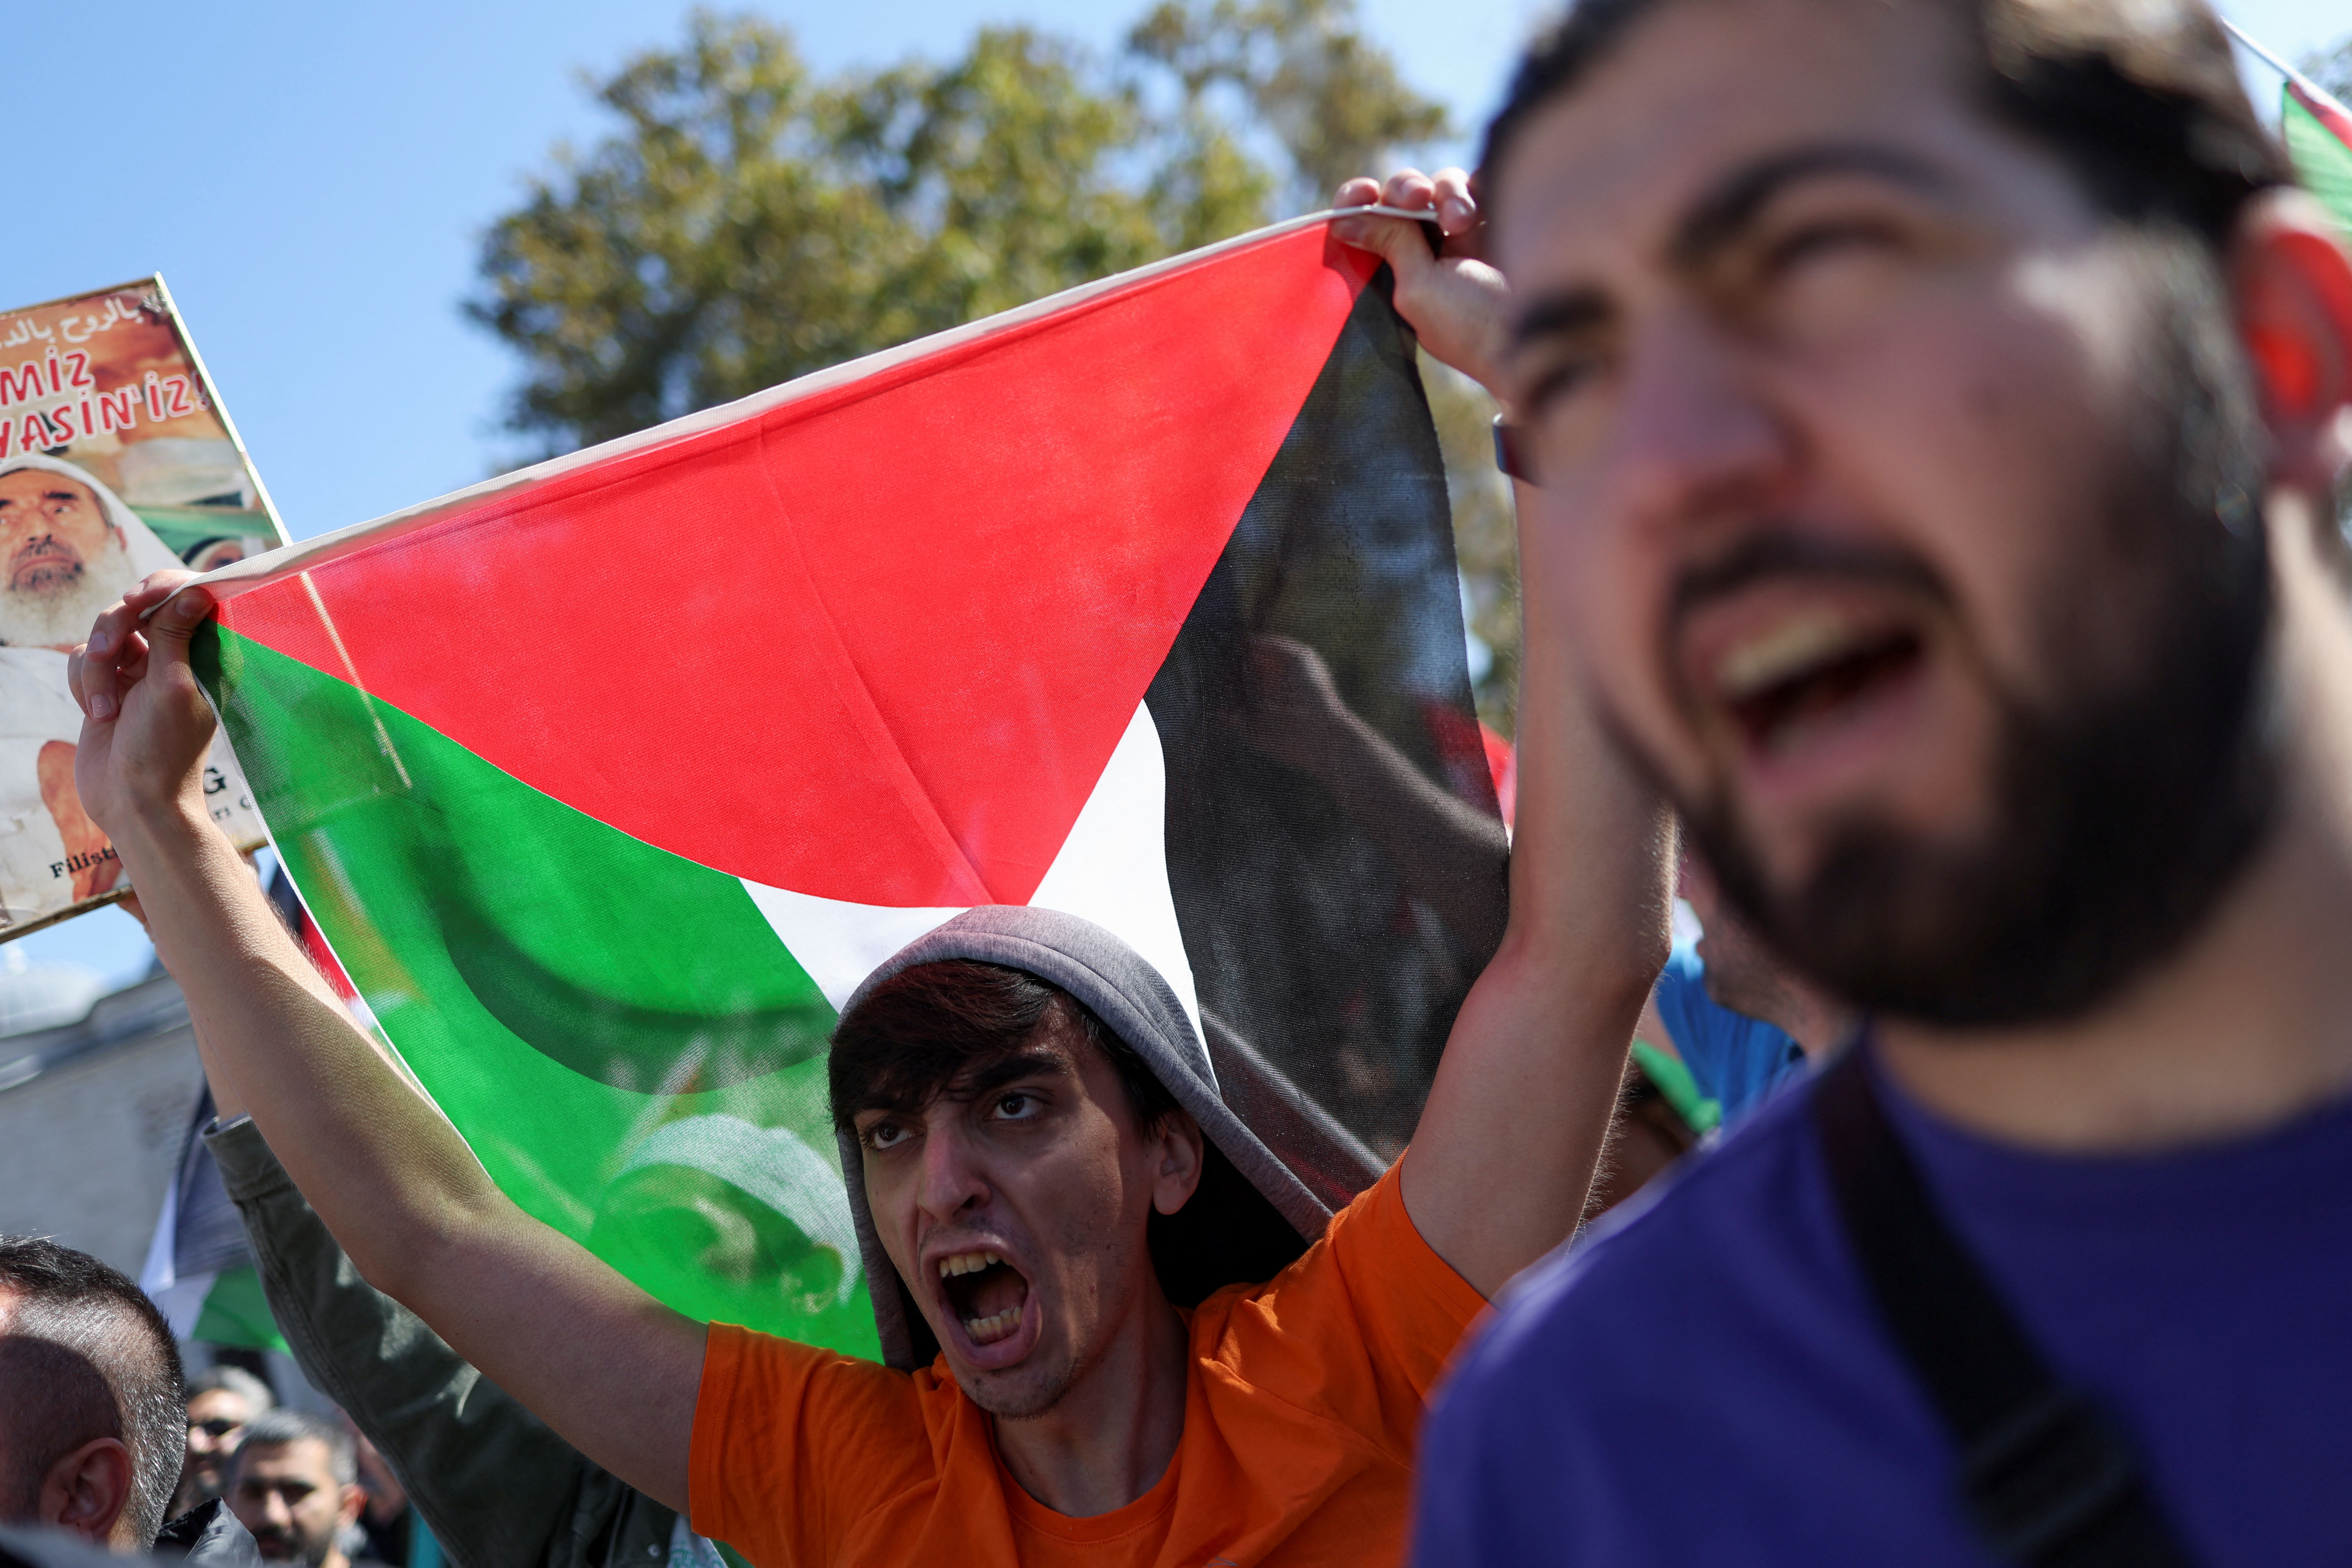 People attend a demonstration to express solidarity with Palestinians in Gaza, amid the ongoing conflict between Israel and the Palestinian Islamist group Hamas, in Istanbul,